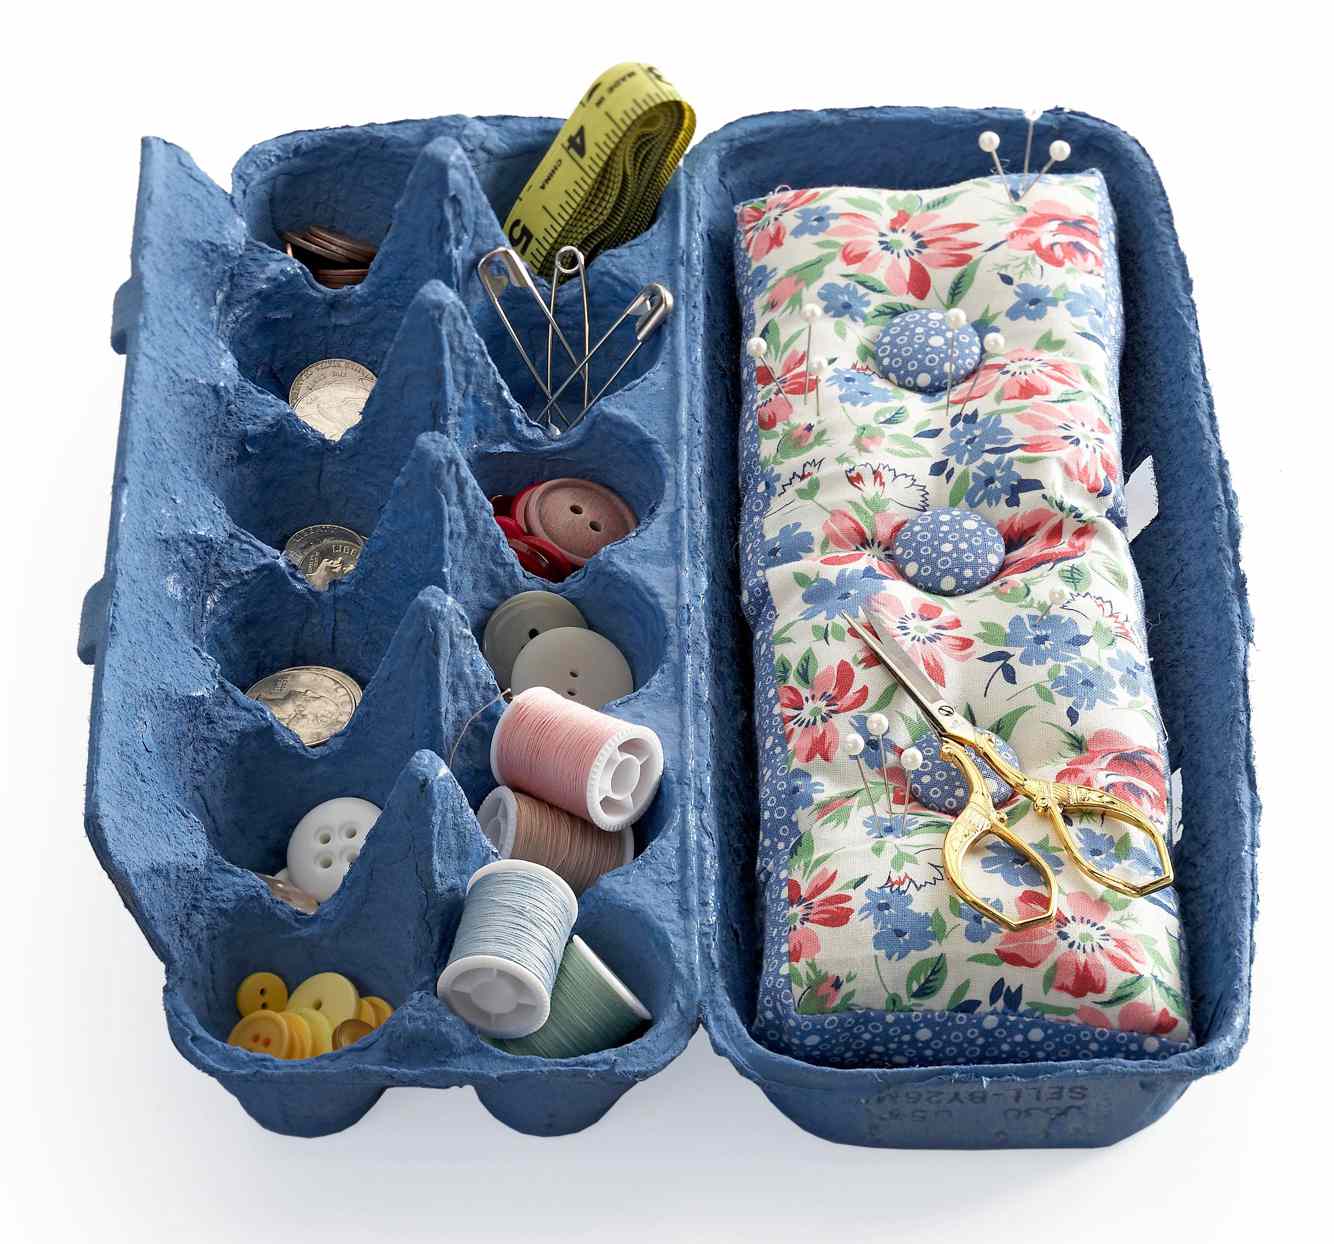 Sewing Organizer Gift Idea for Mom